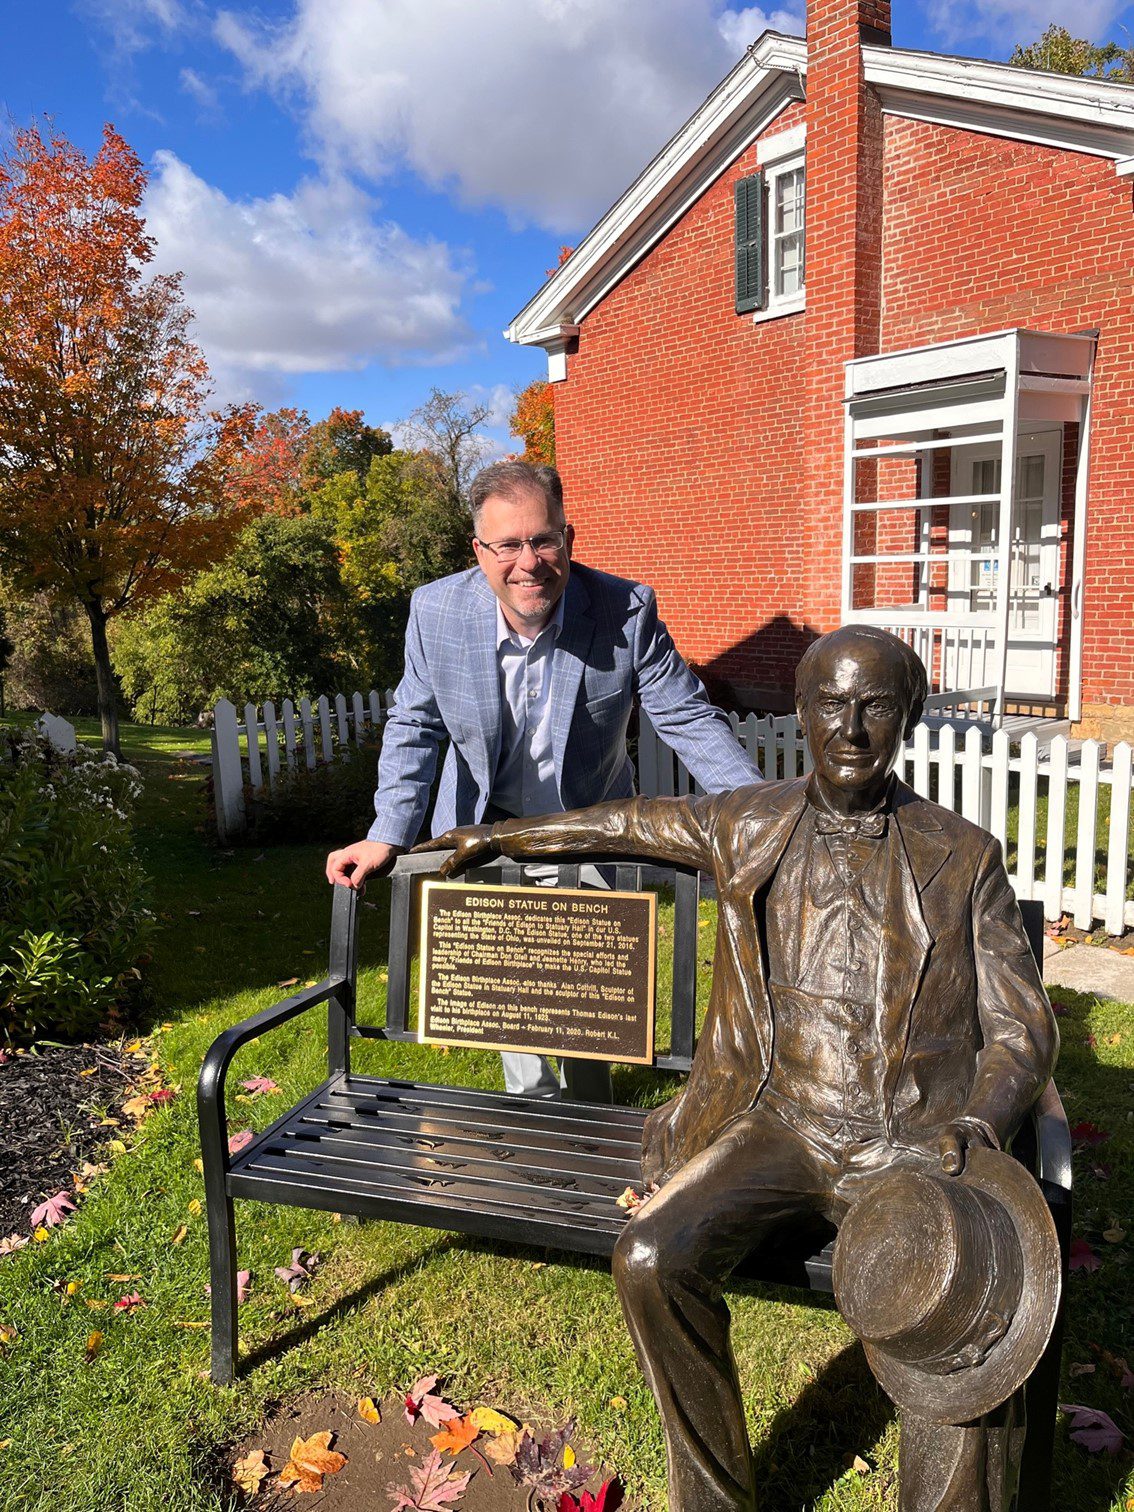 An outdoor photo taken during the day with a white male in a light grey suit who is leaning on a black bench and smiling. He is joined by a dark bronze statue of Thomas Edison who is sitting on the bench. Behind them is a two-story brick building.